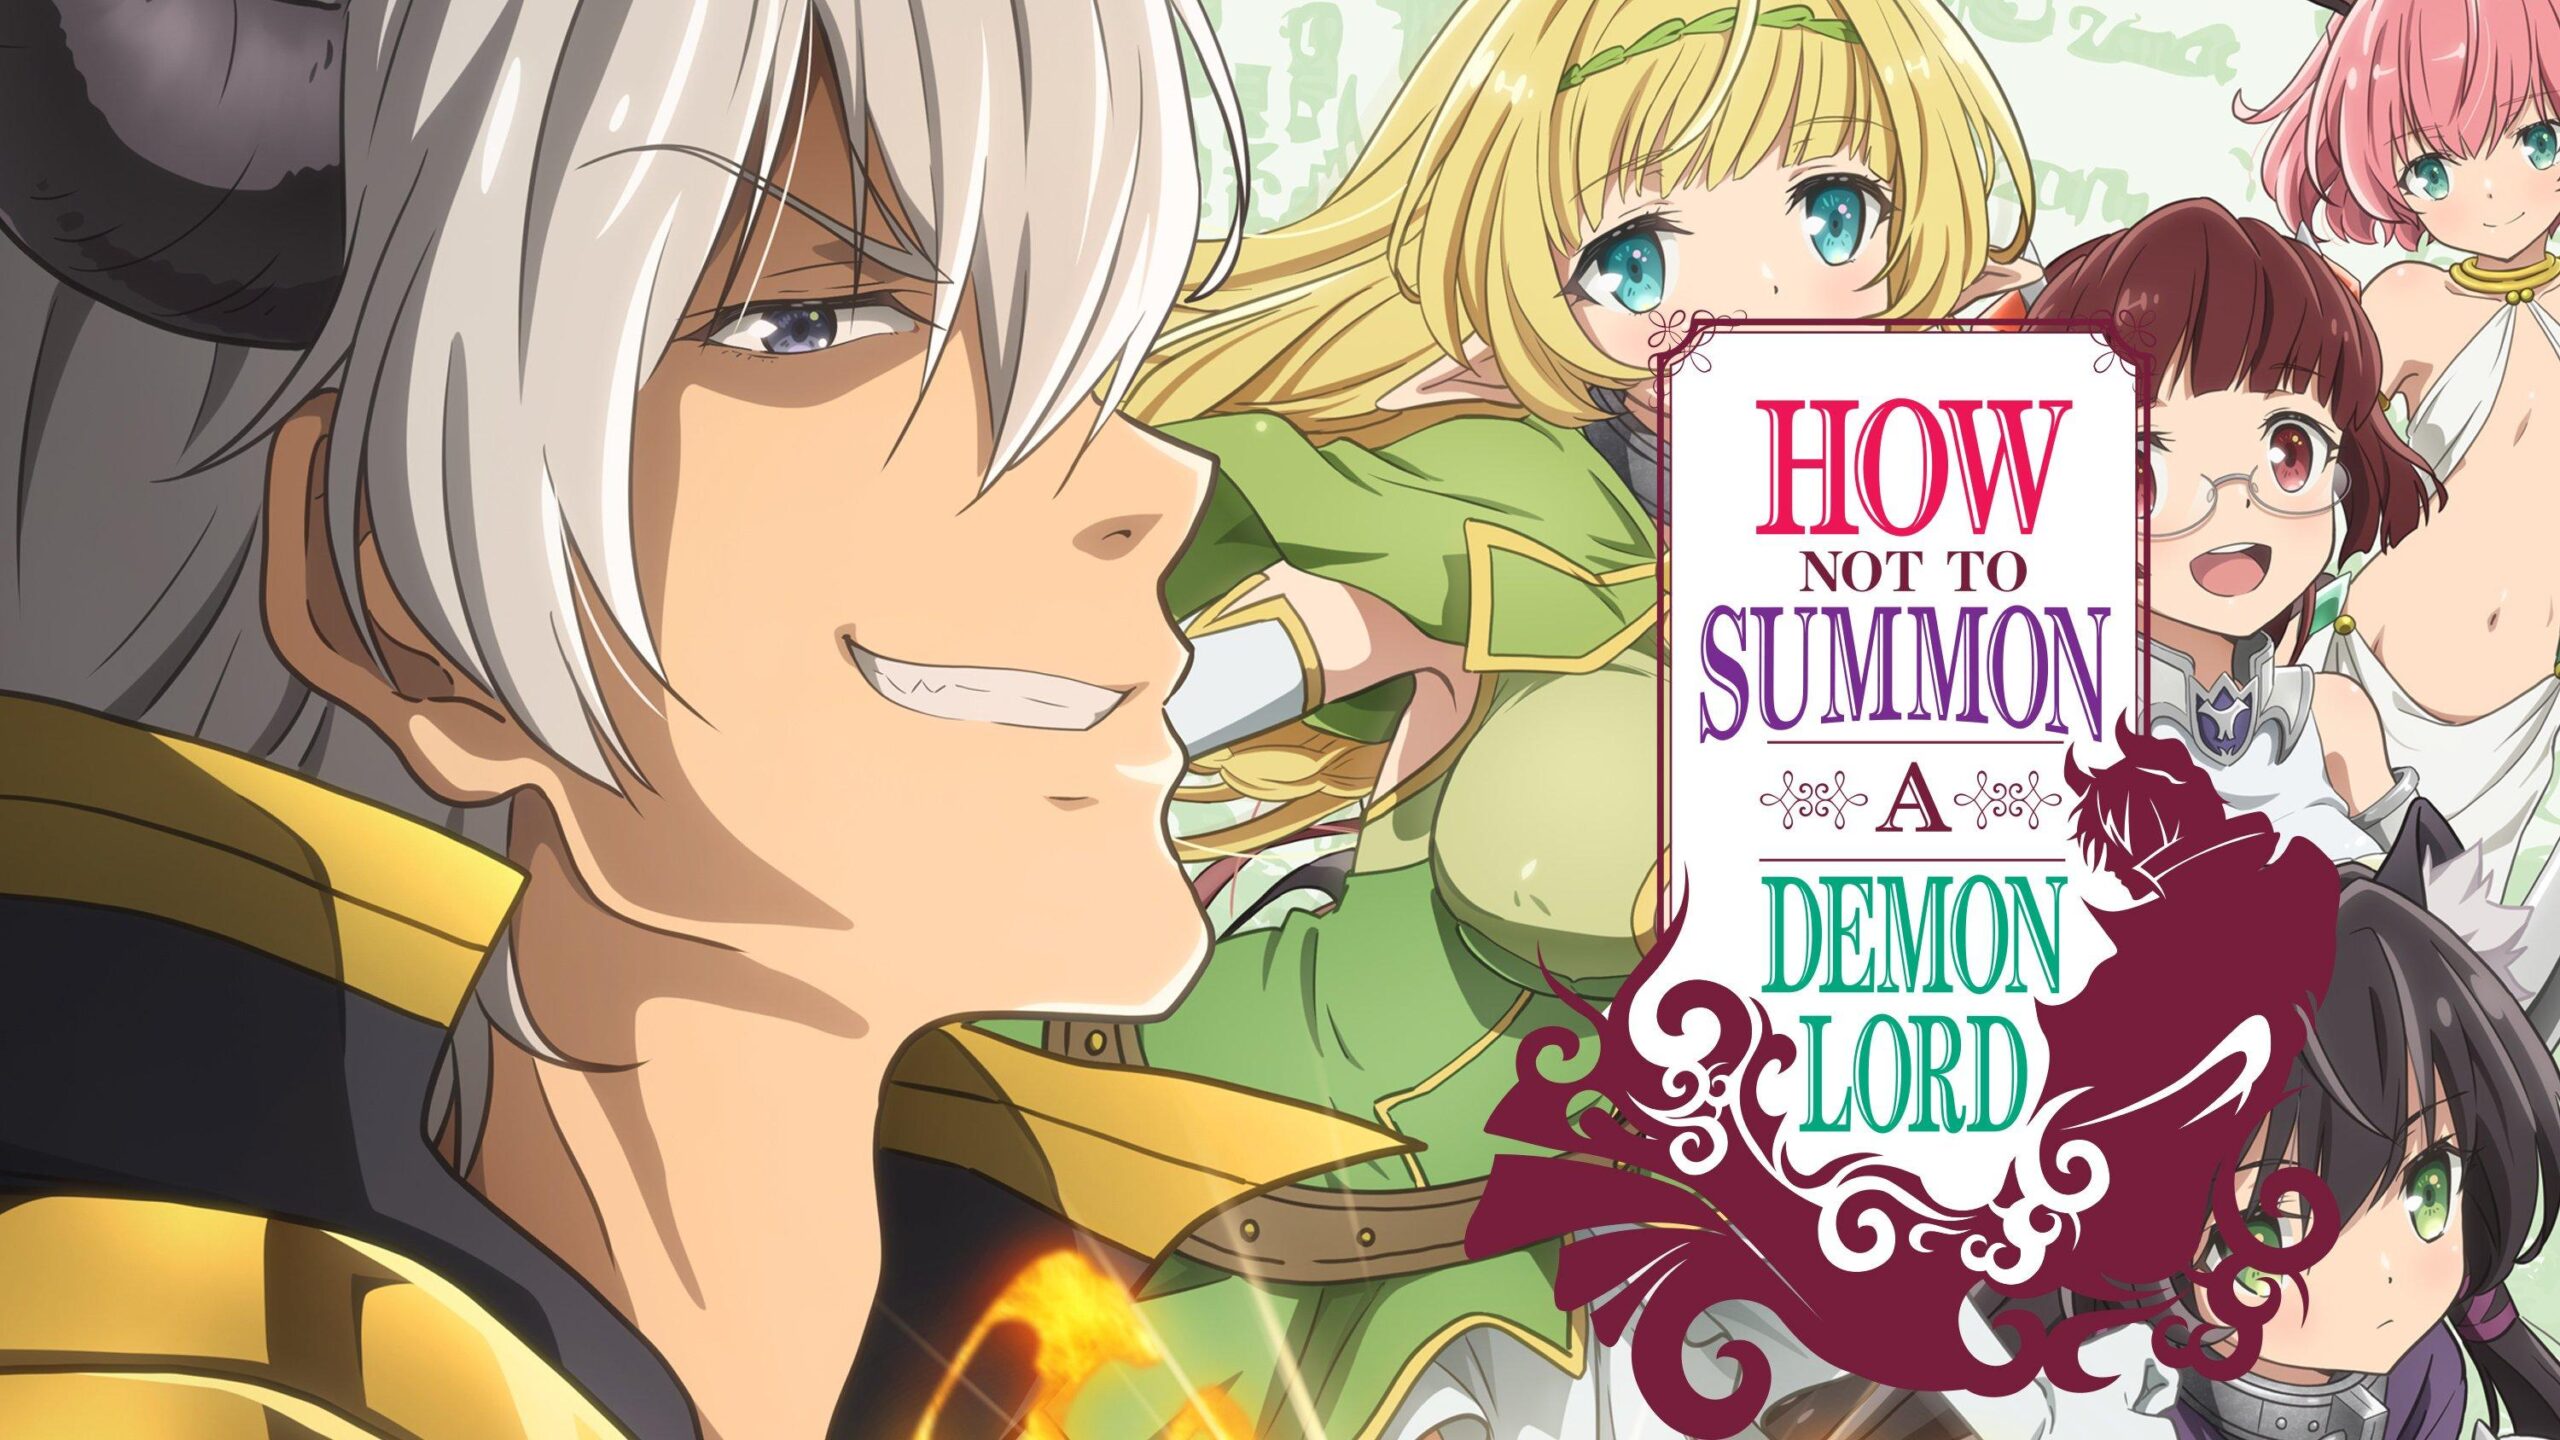 How NOT To Summon A Demon Lord Best Wallpaper Hd, How NOT To Summon A Demon Lord, Anime